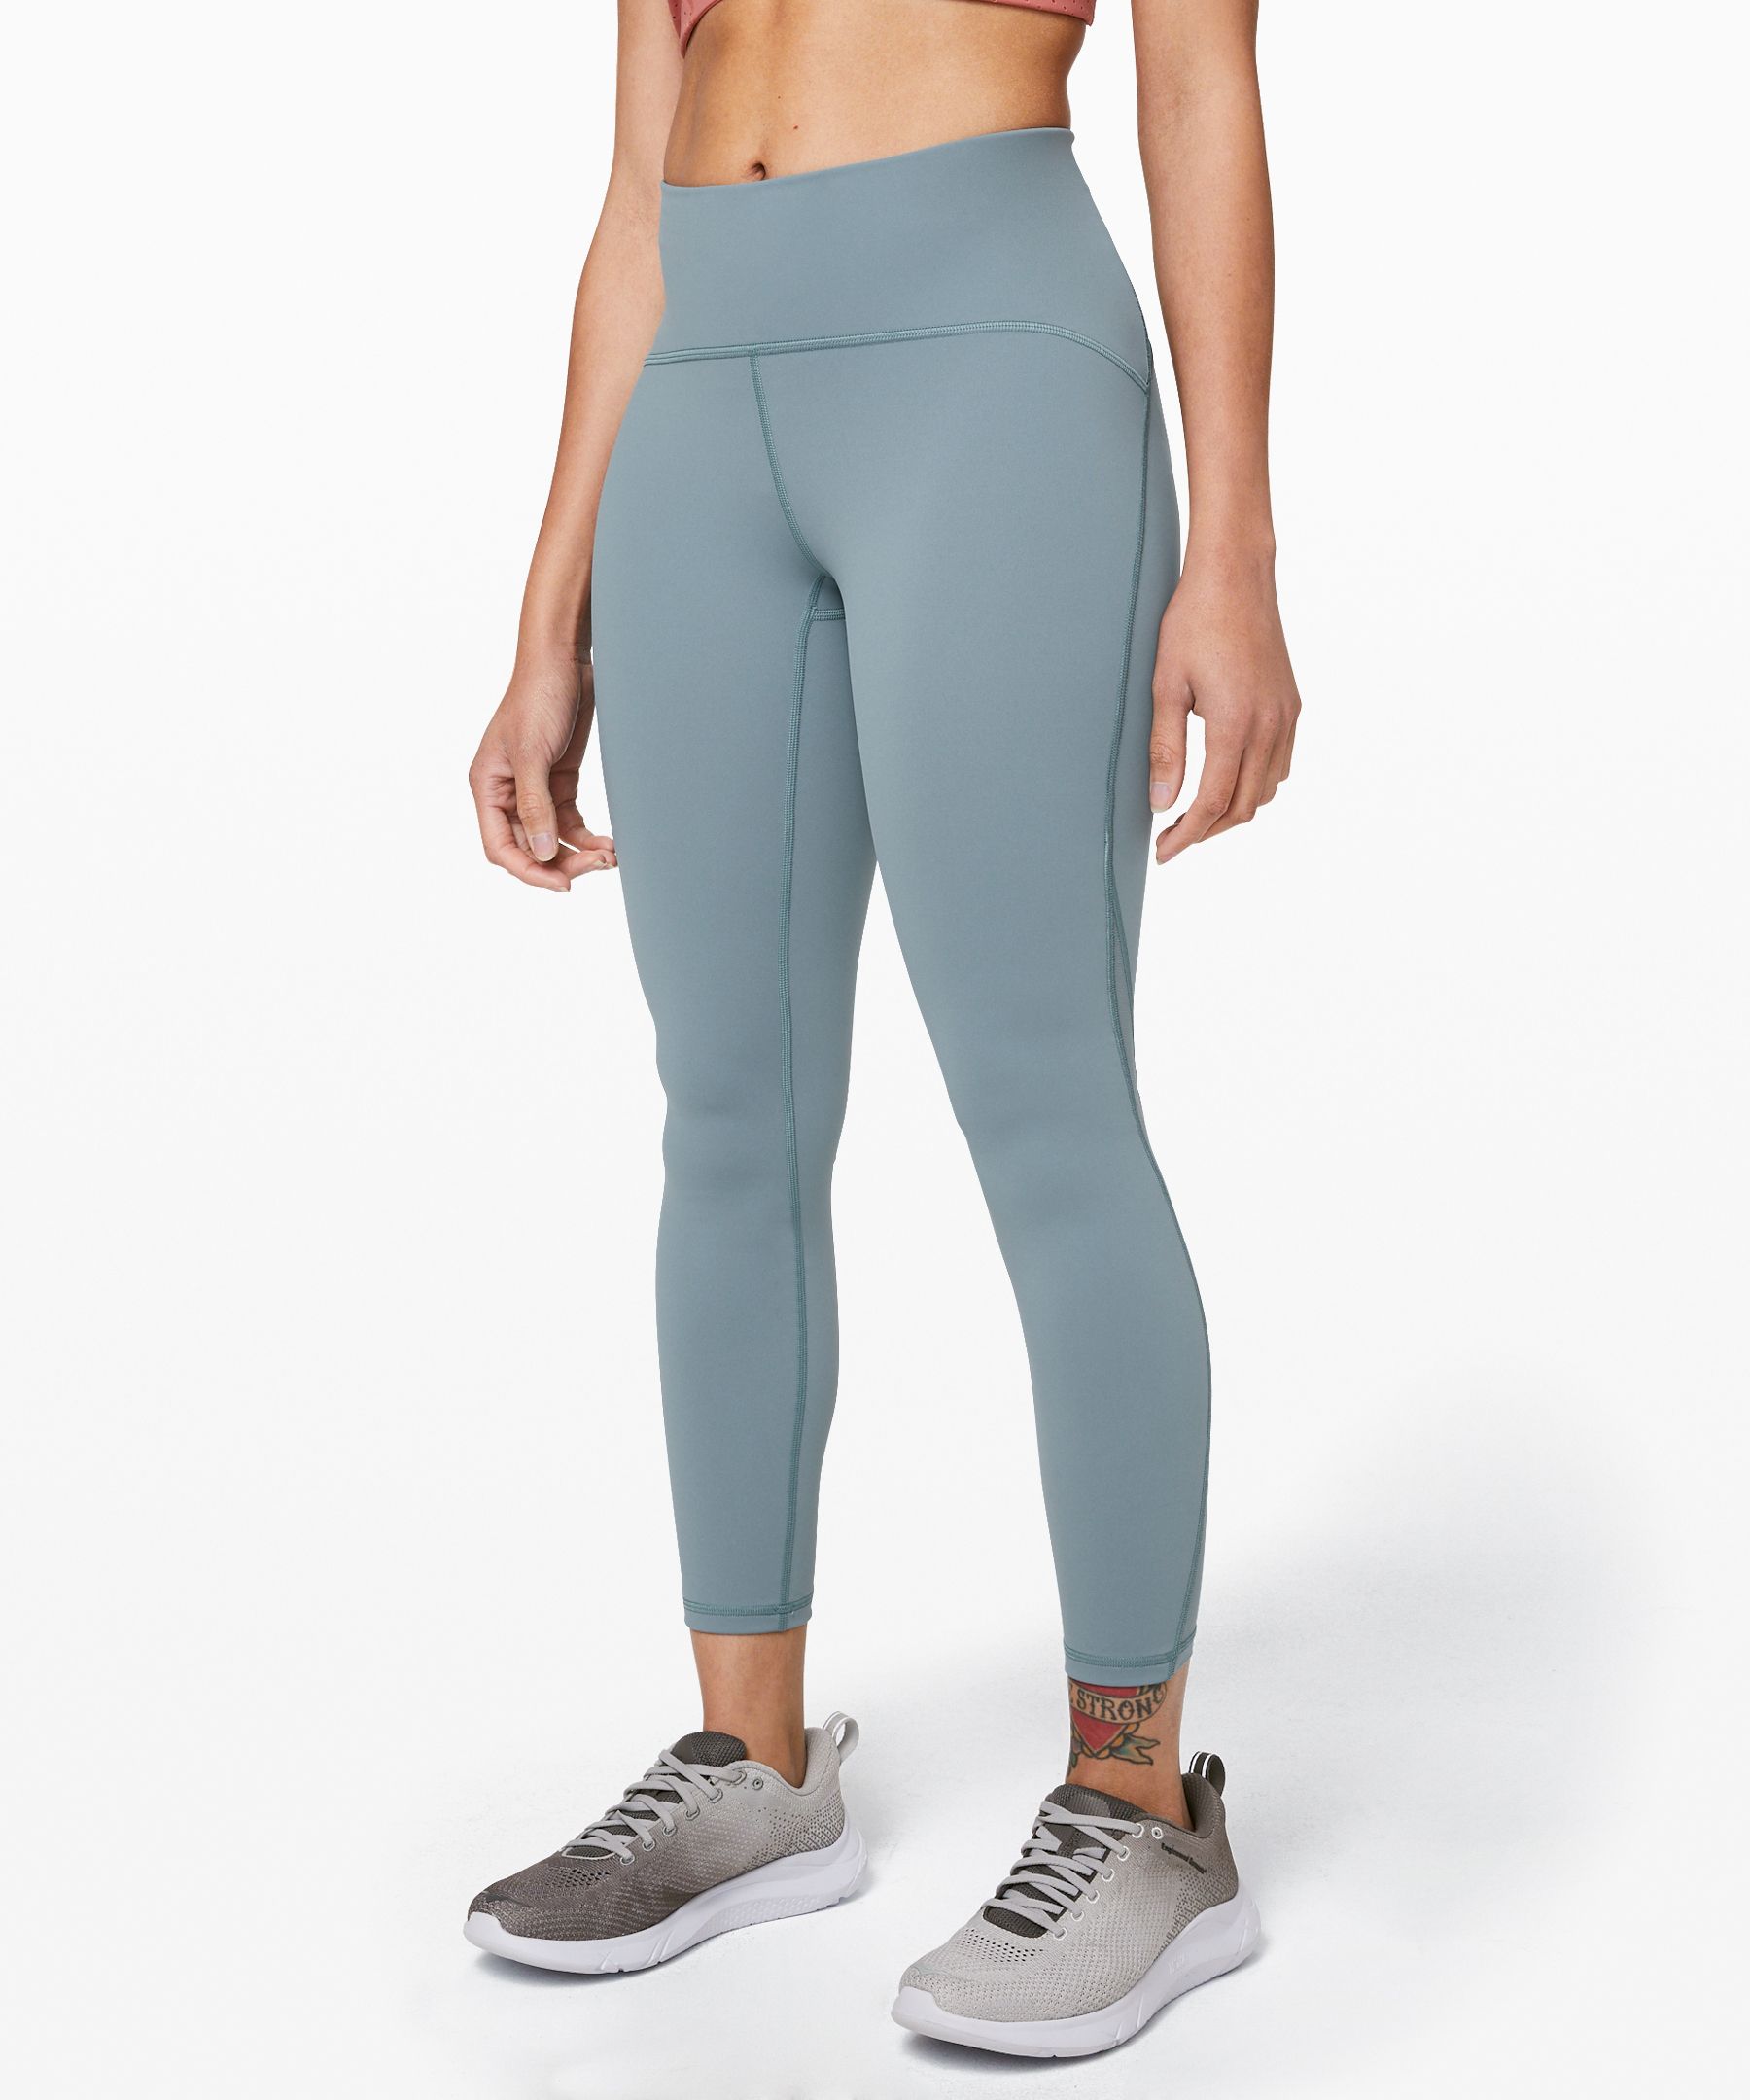 Lululemon Train Times 7/8 Pant Reviews 2020  International Society of  Precision Agriculture